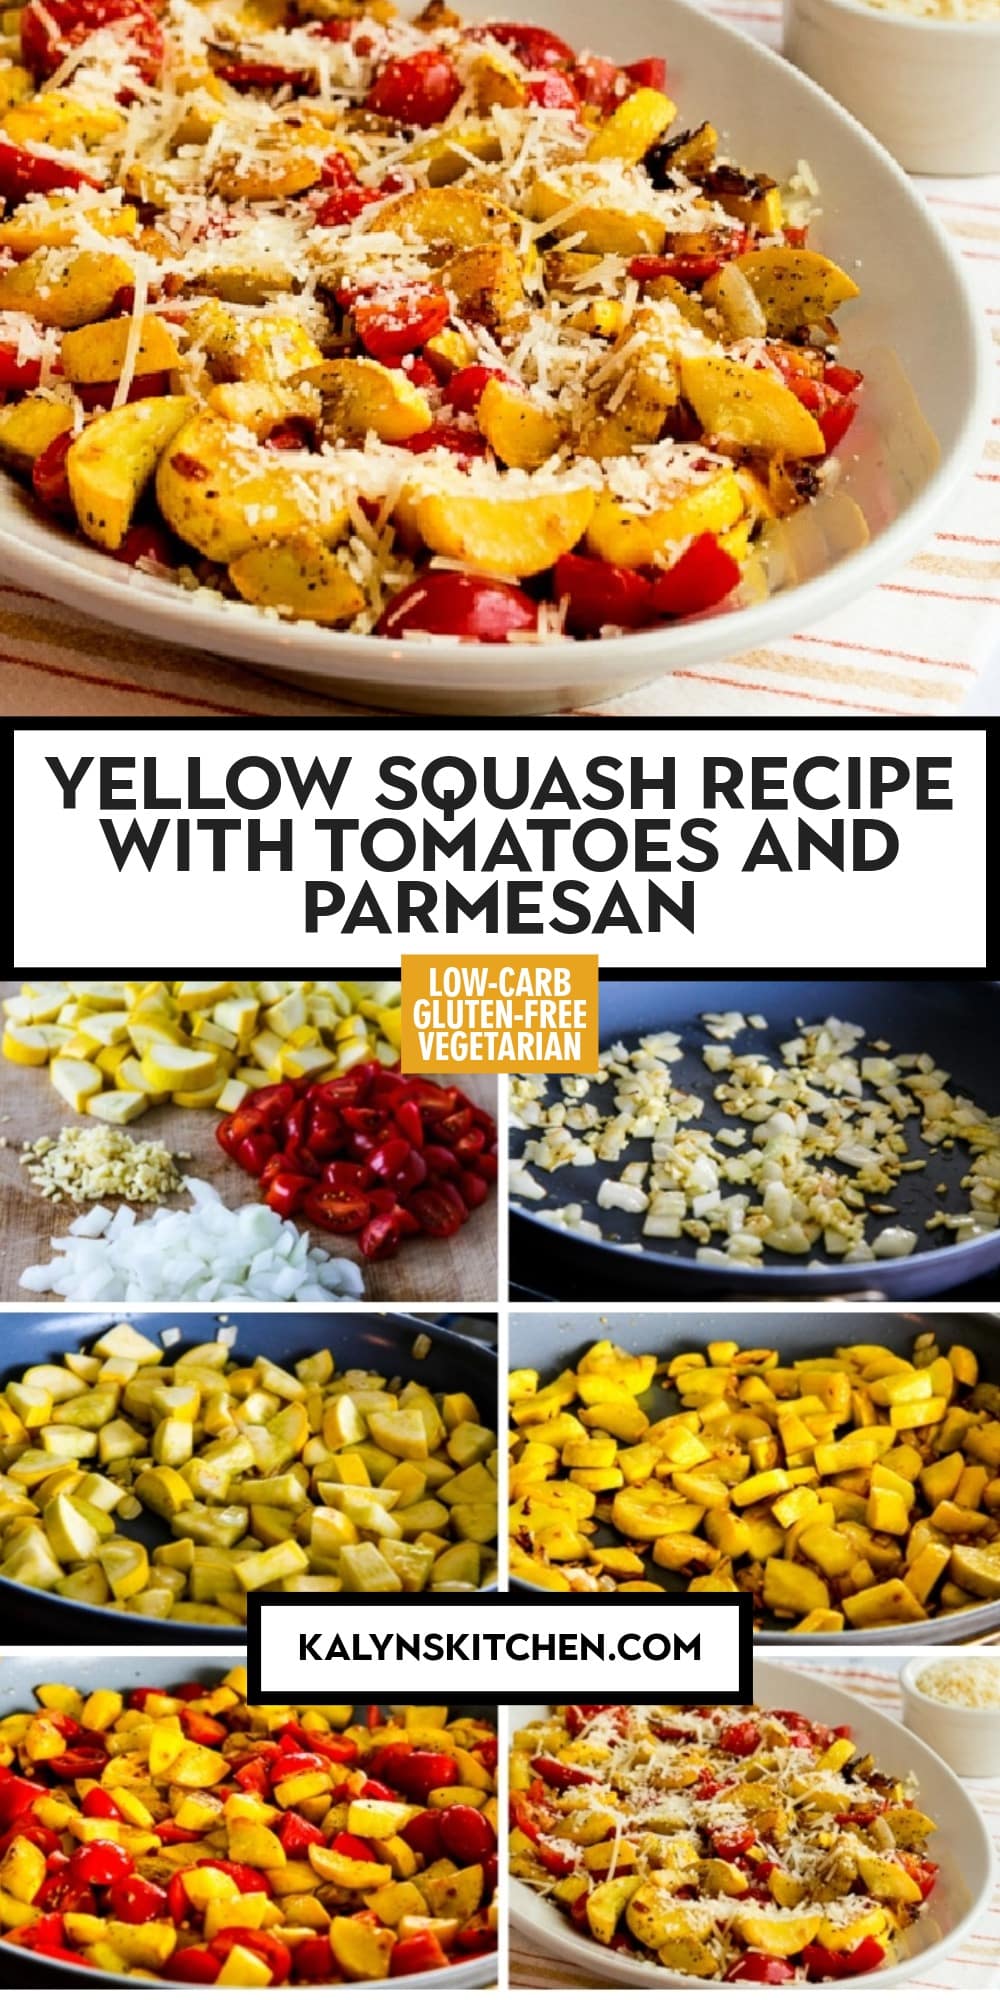 Pinterest image of Yellow Squash Recipe with Tomatoes and Parmesan